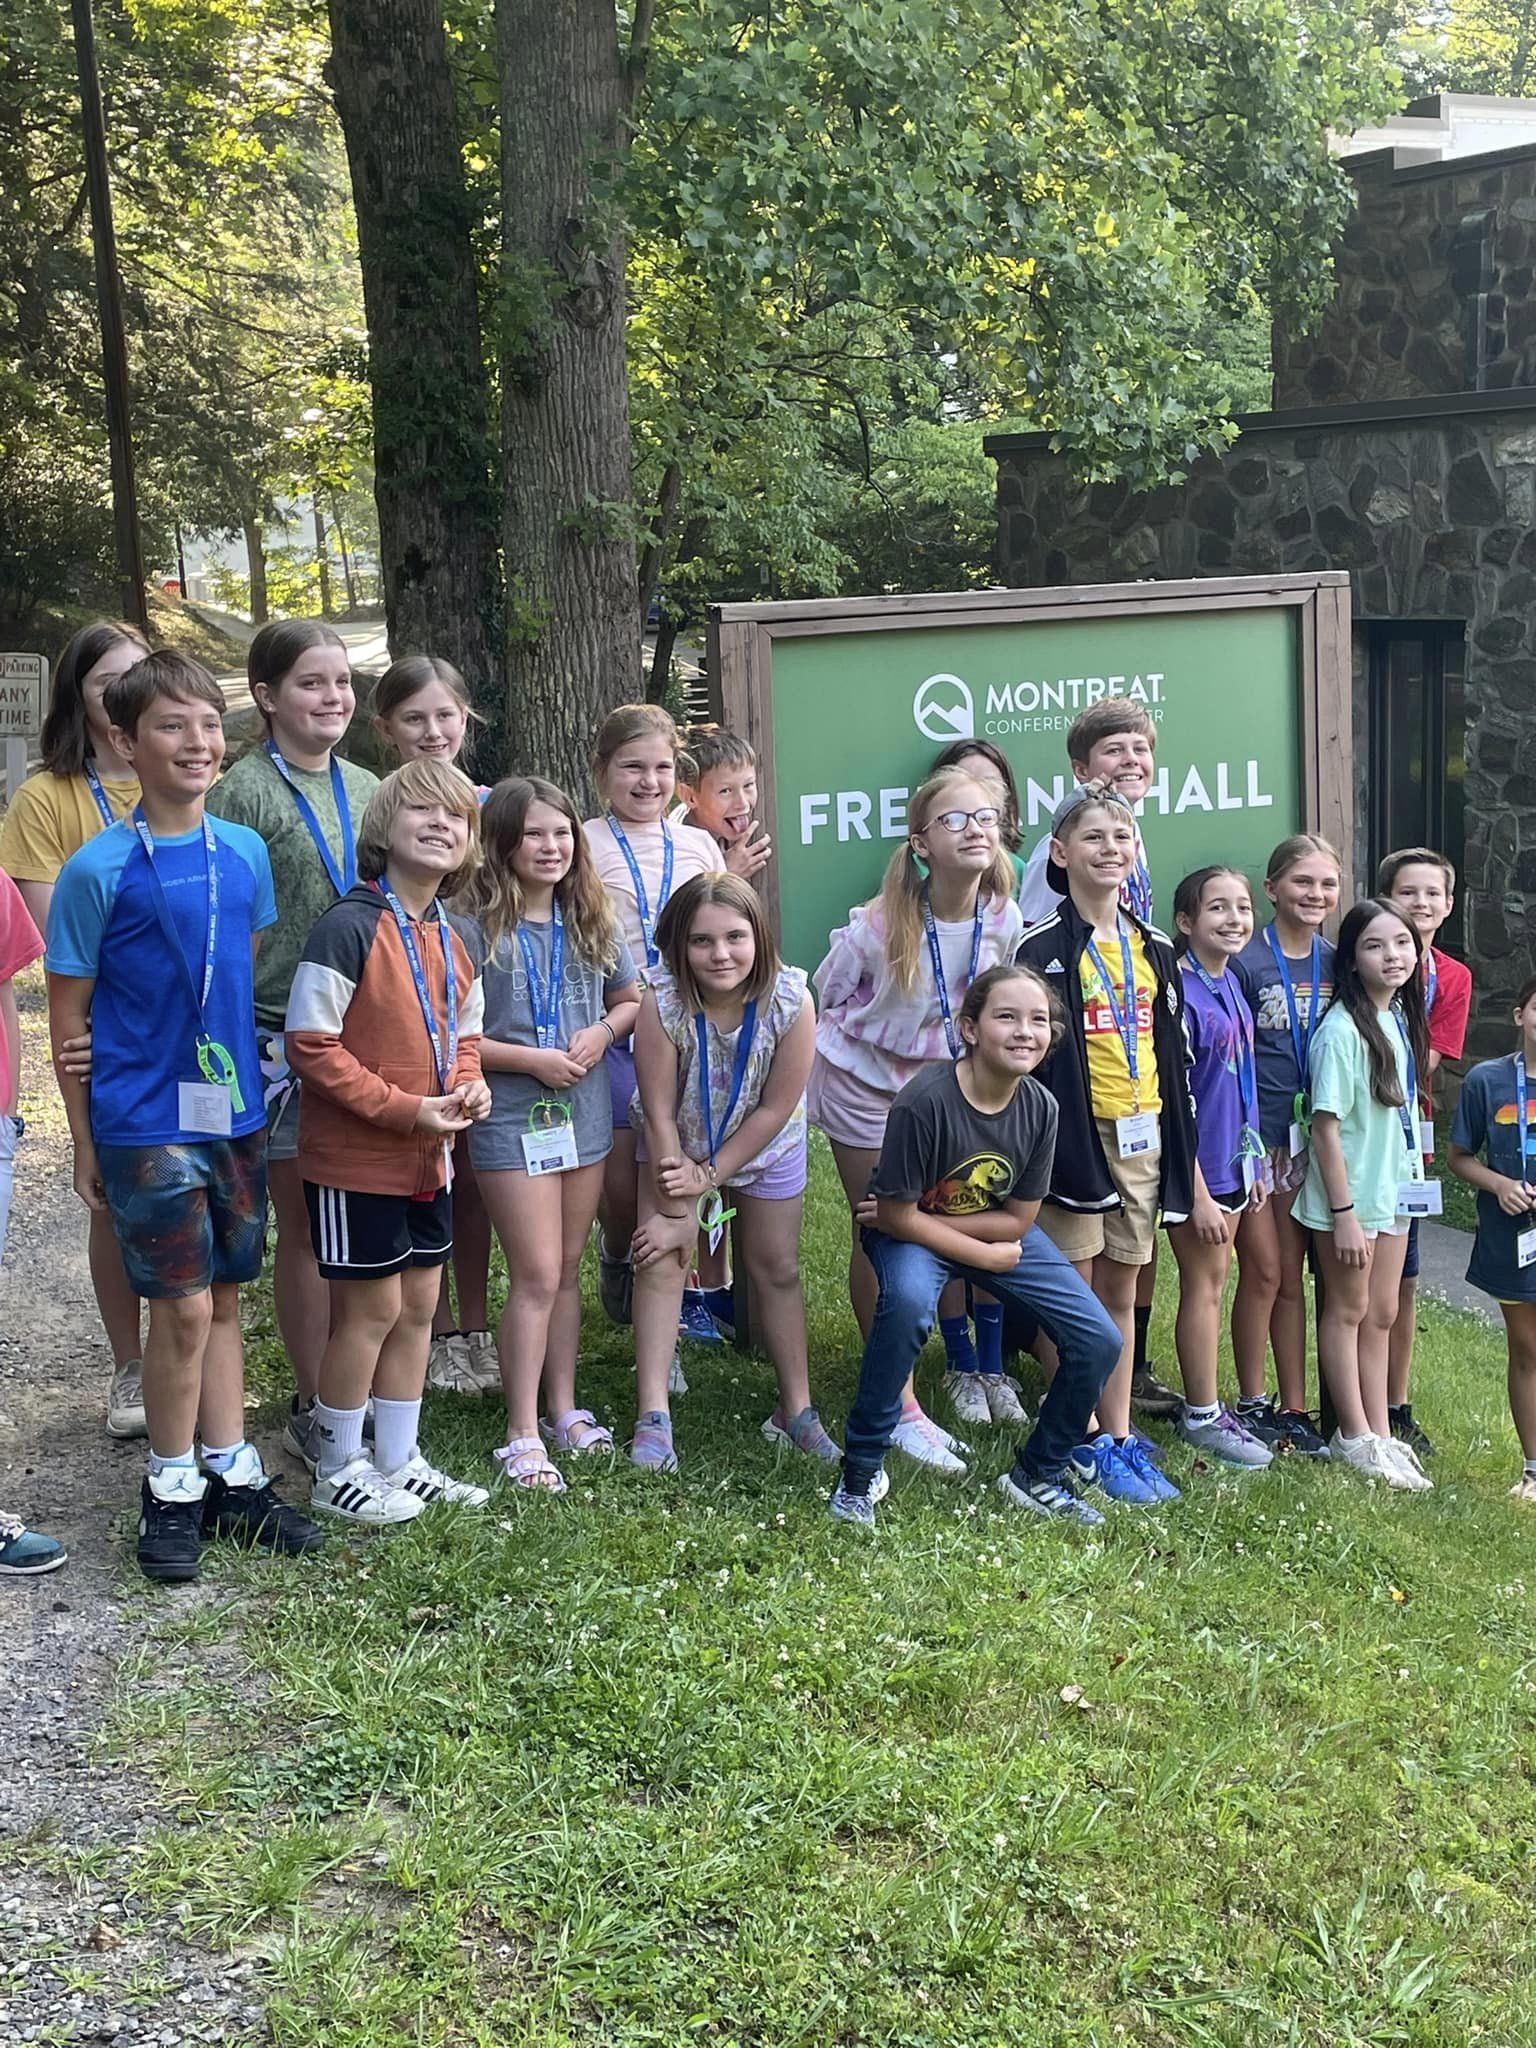 children and youth at Montreat